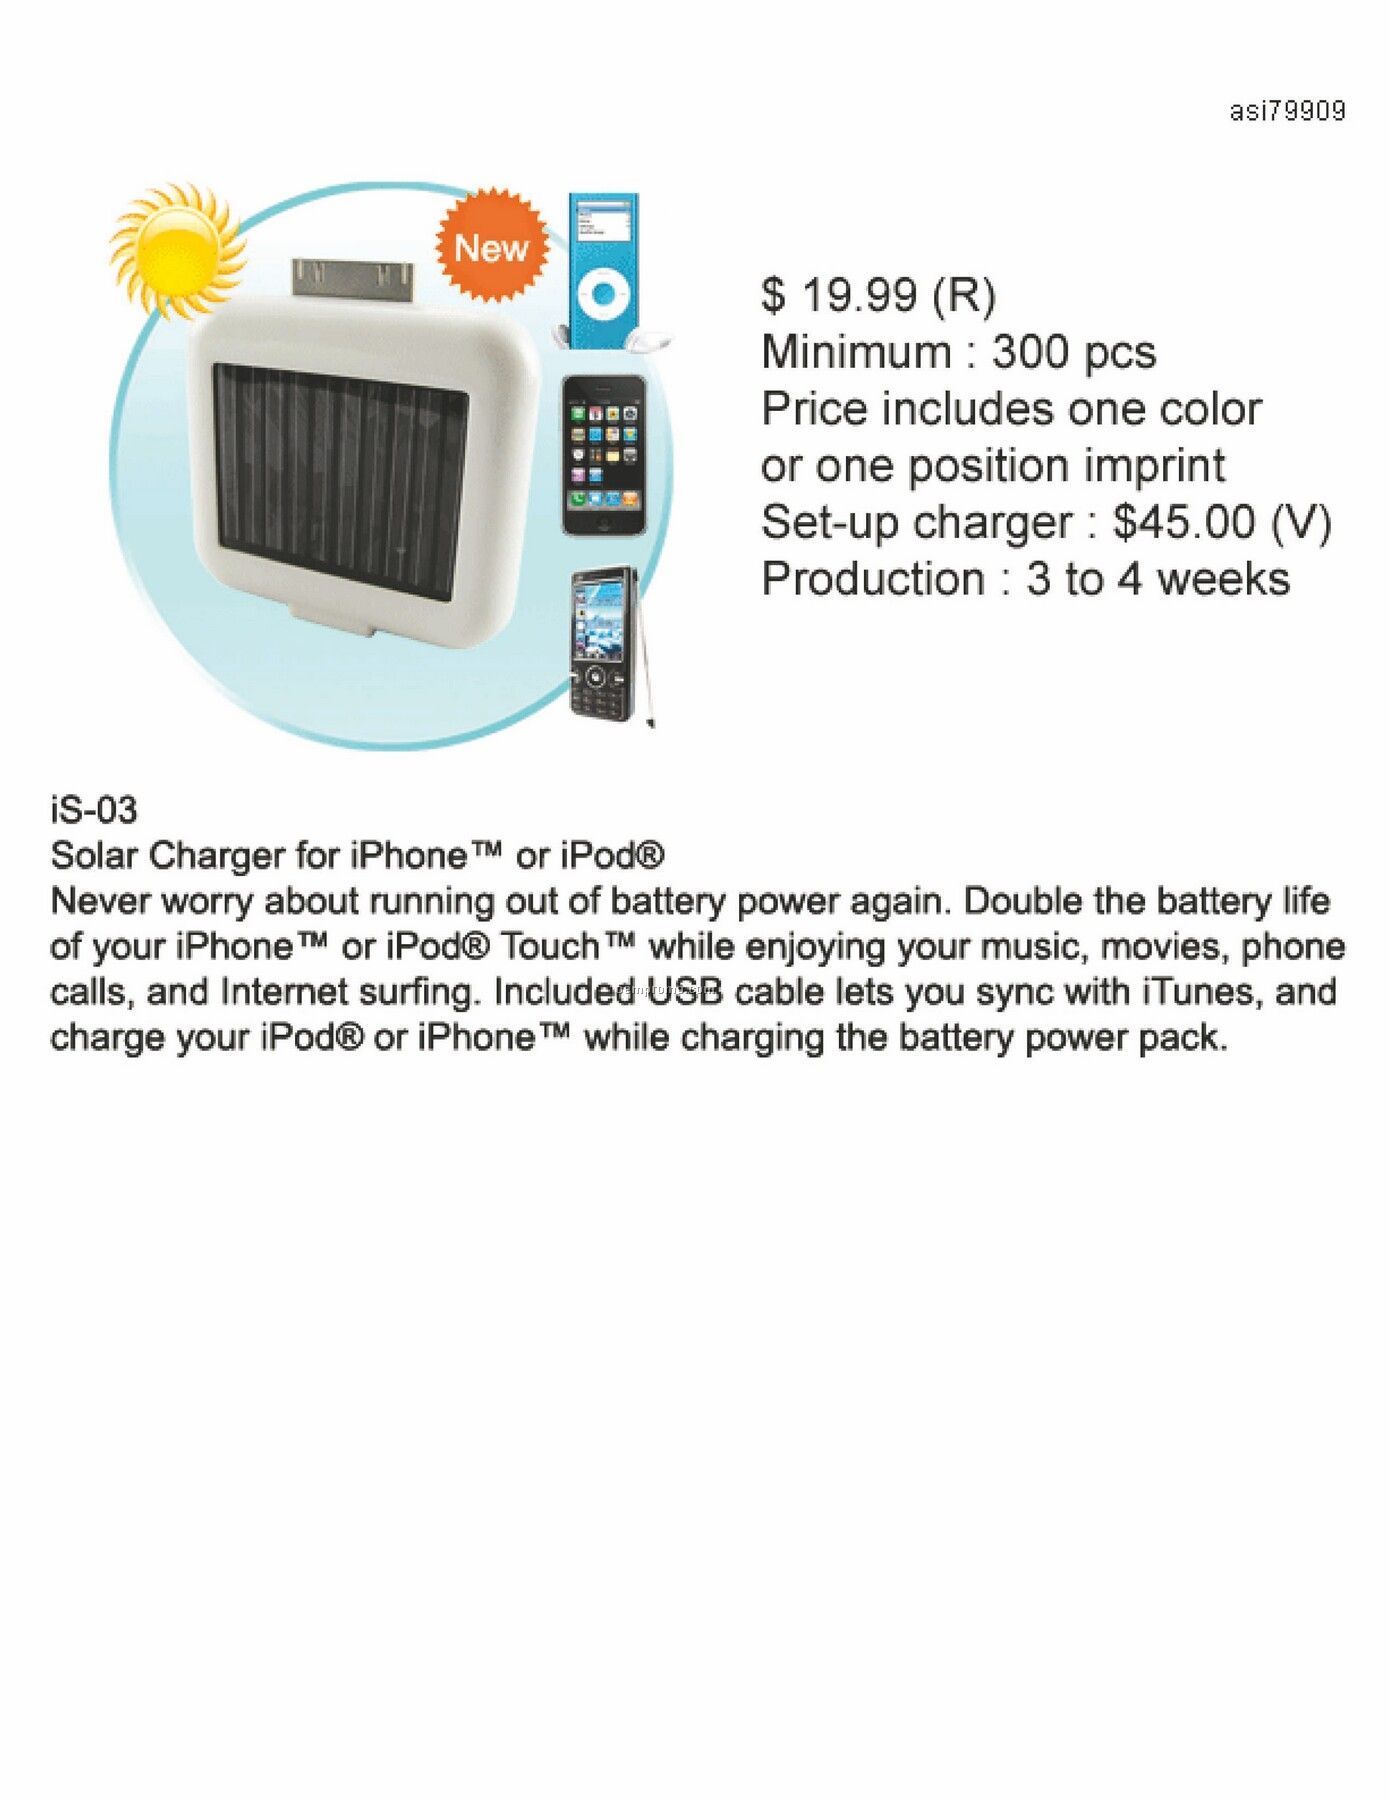 Solar Charger For Iphone, Ipod